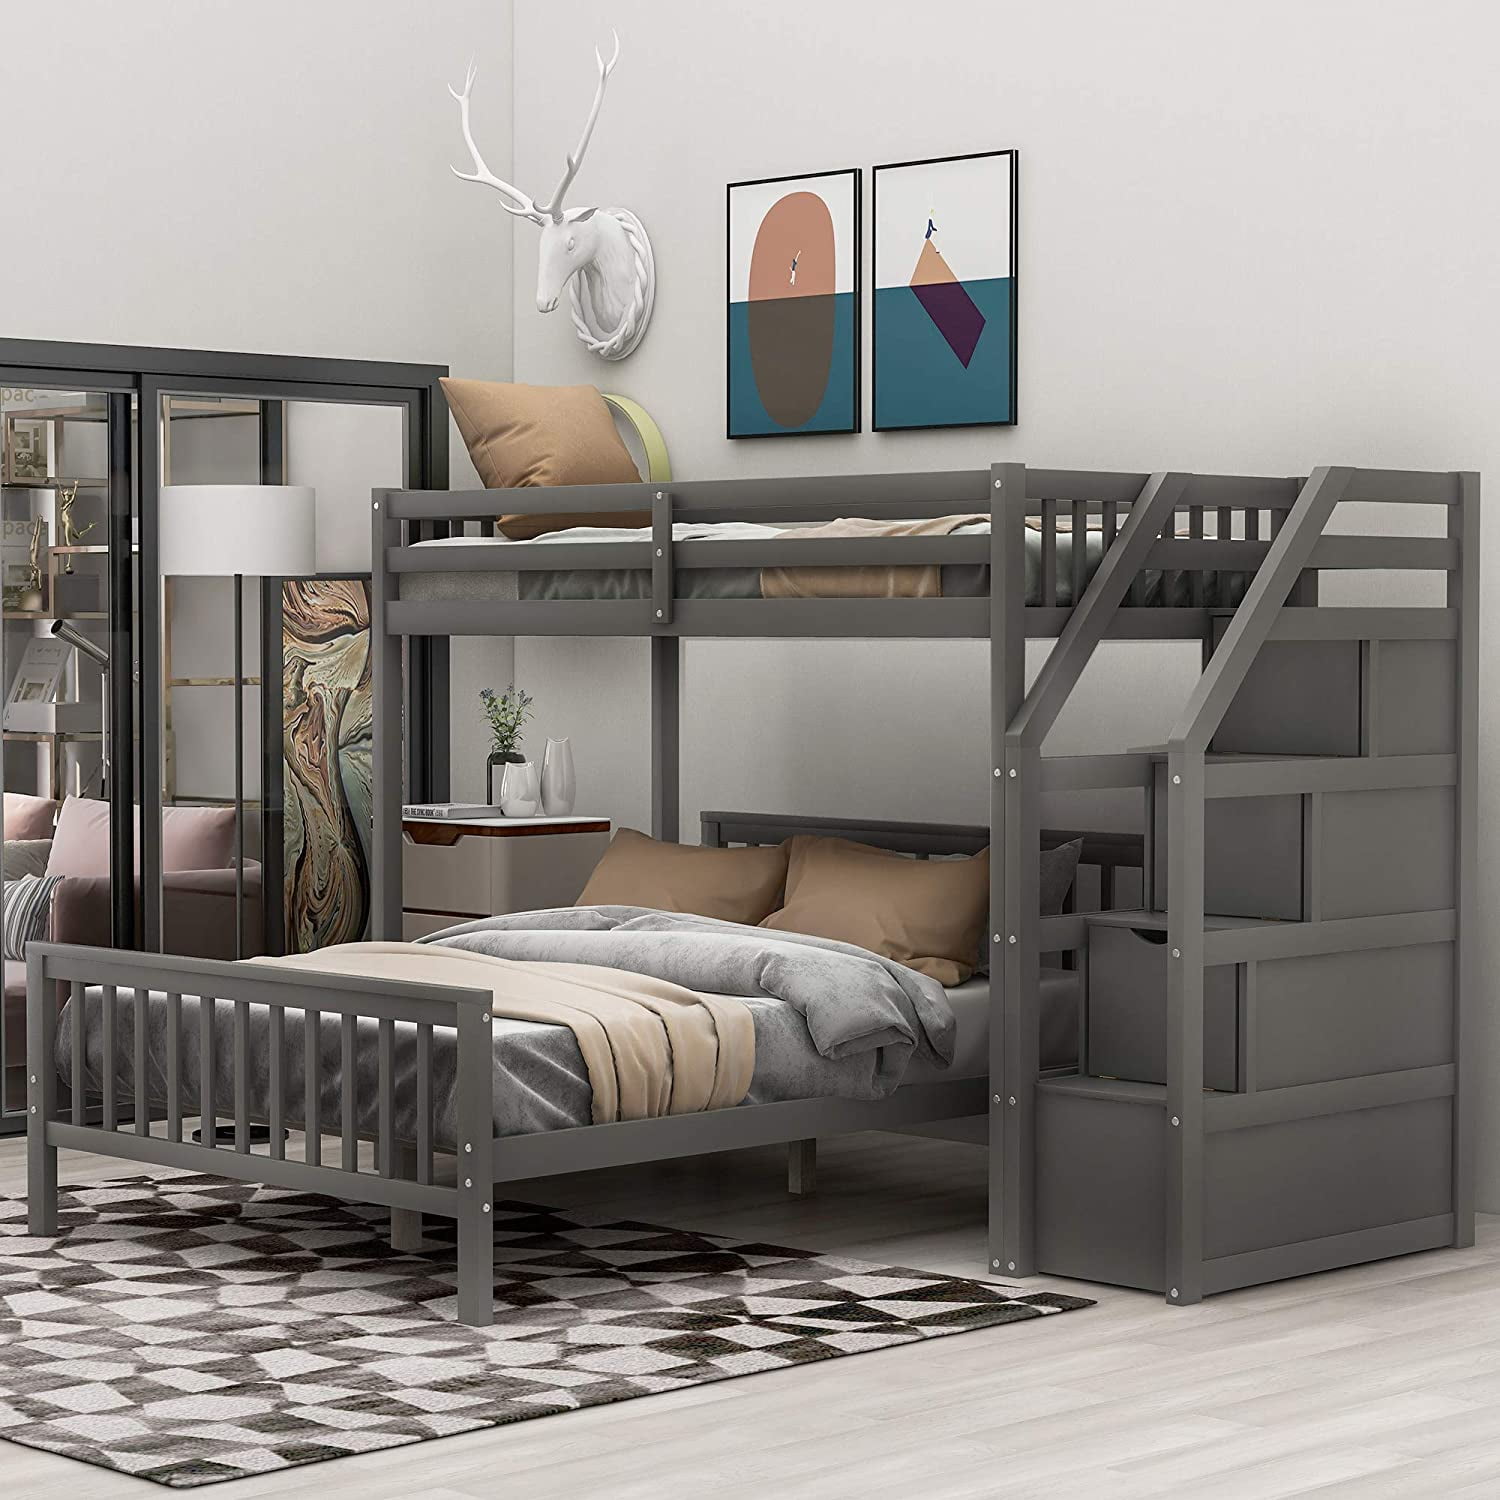 Full Loft Bed With Stairway And Storage, Teenager Bunk Beds